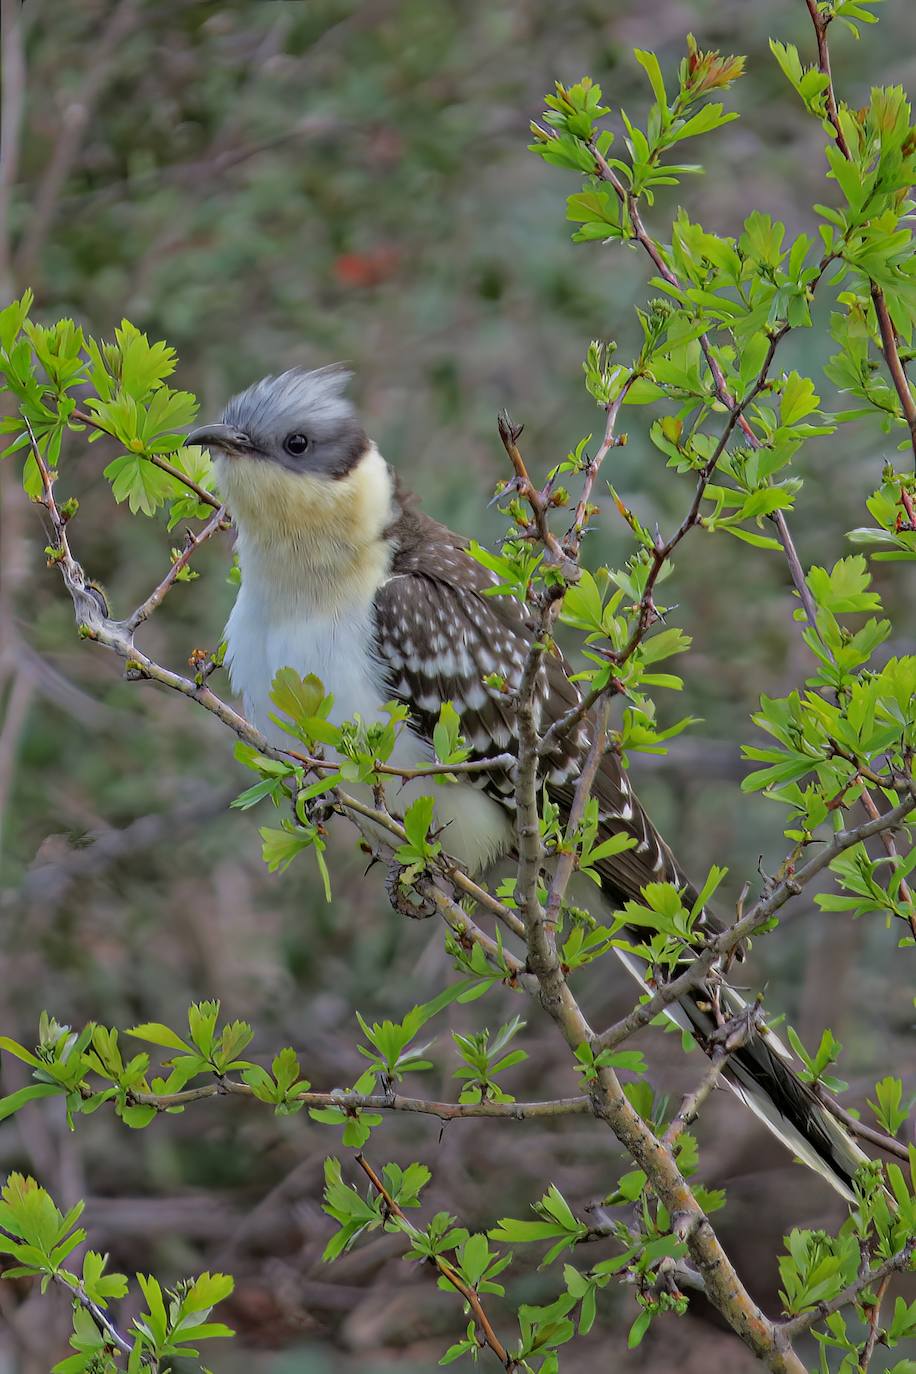 The Great-spotted Cuckoo 